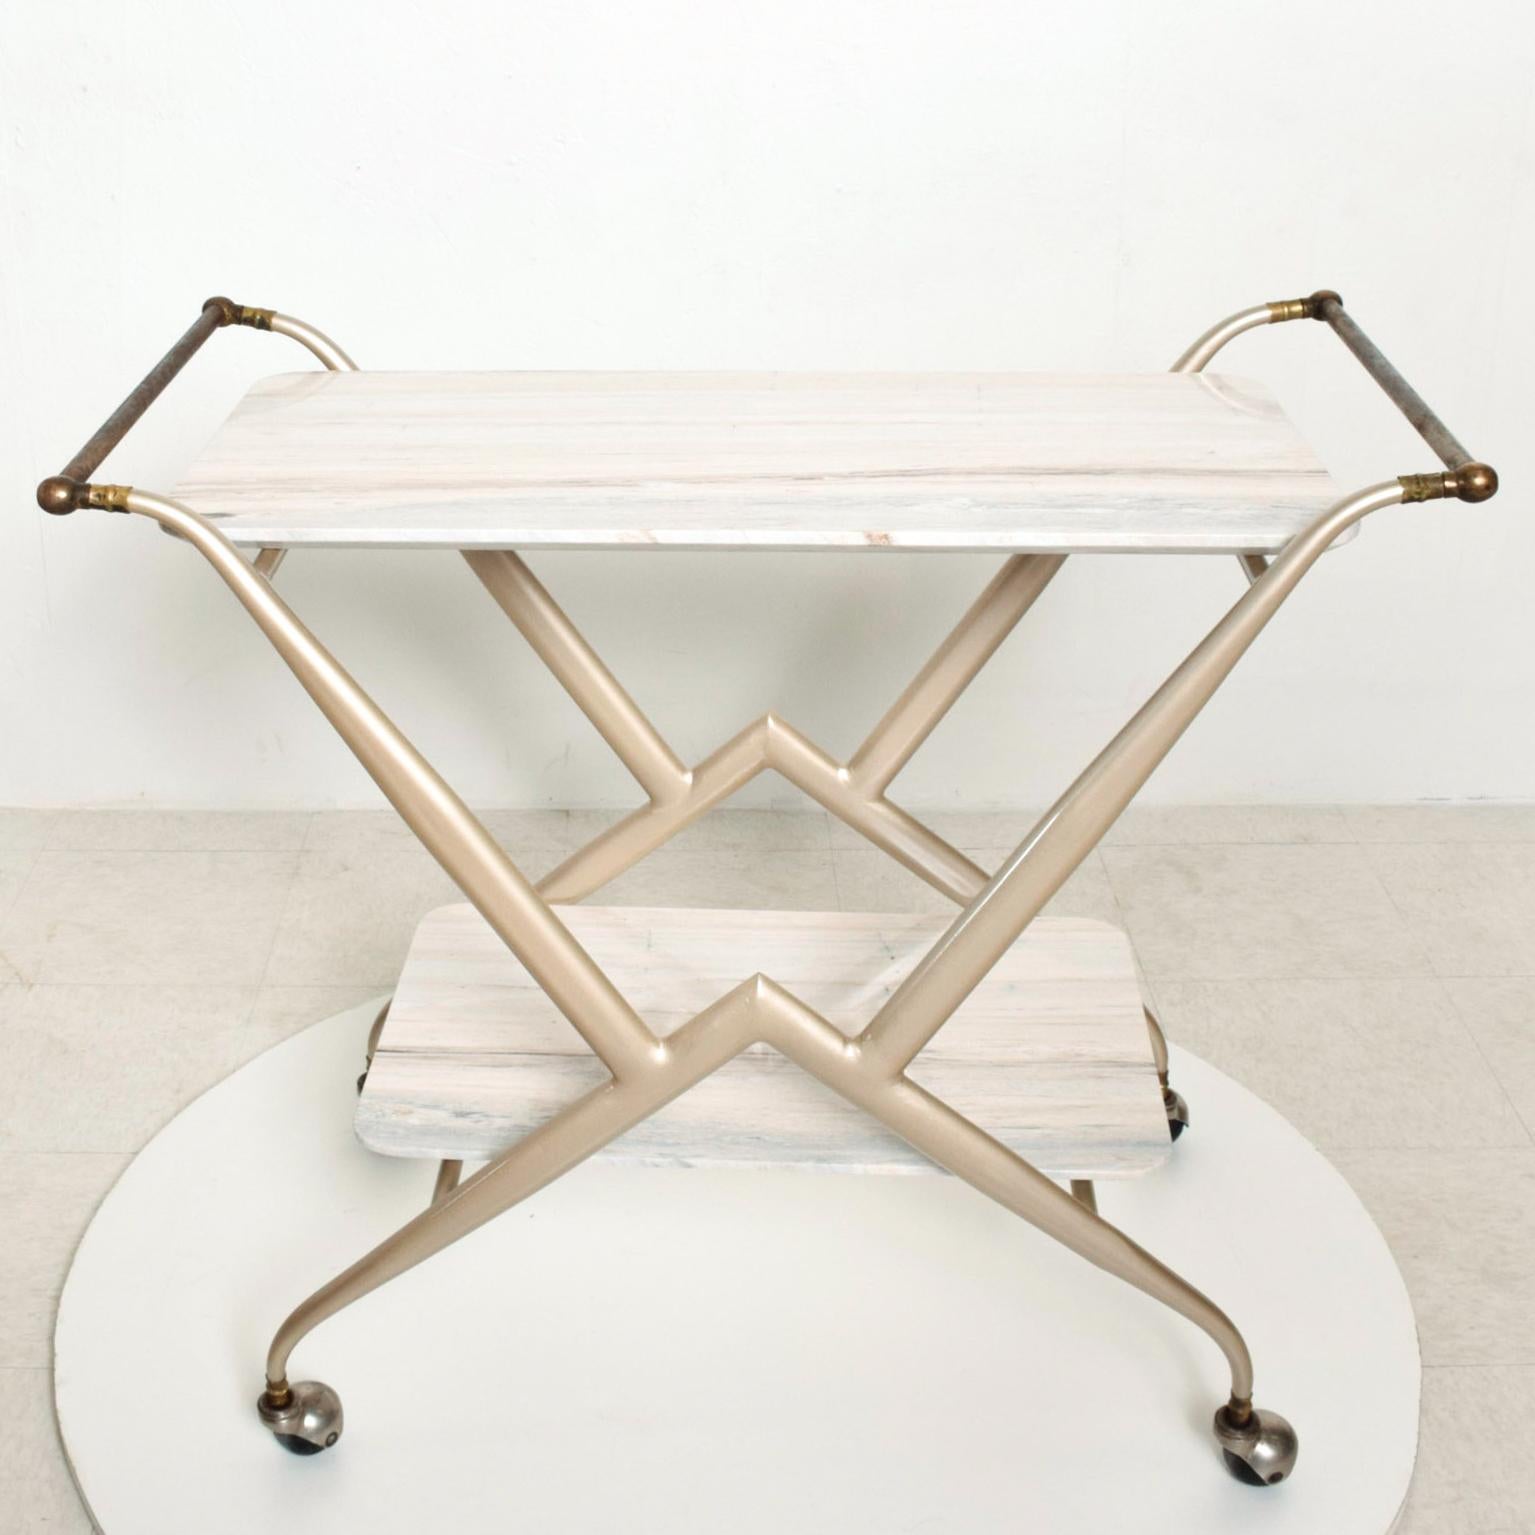 We are pleased to offer for your consideration a beautiful service table. It can be used as a service bar, bakery service table, side or wall console. Constructed with tapered tubular steel with an oval shape. Brass hardware mounted in the original